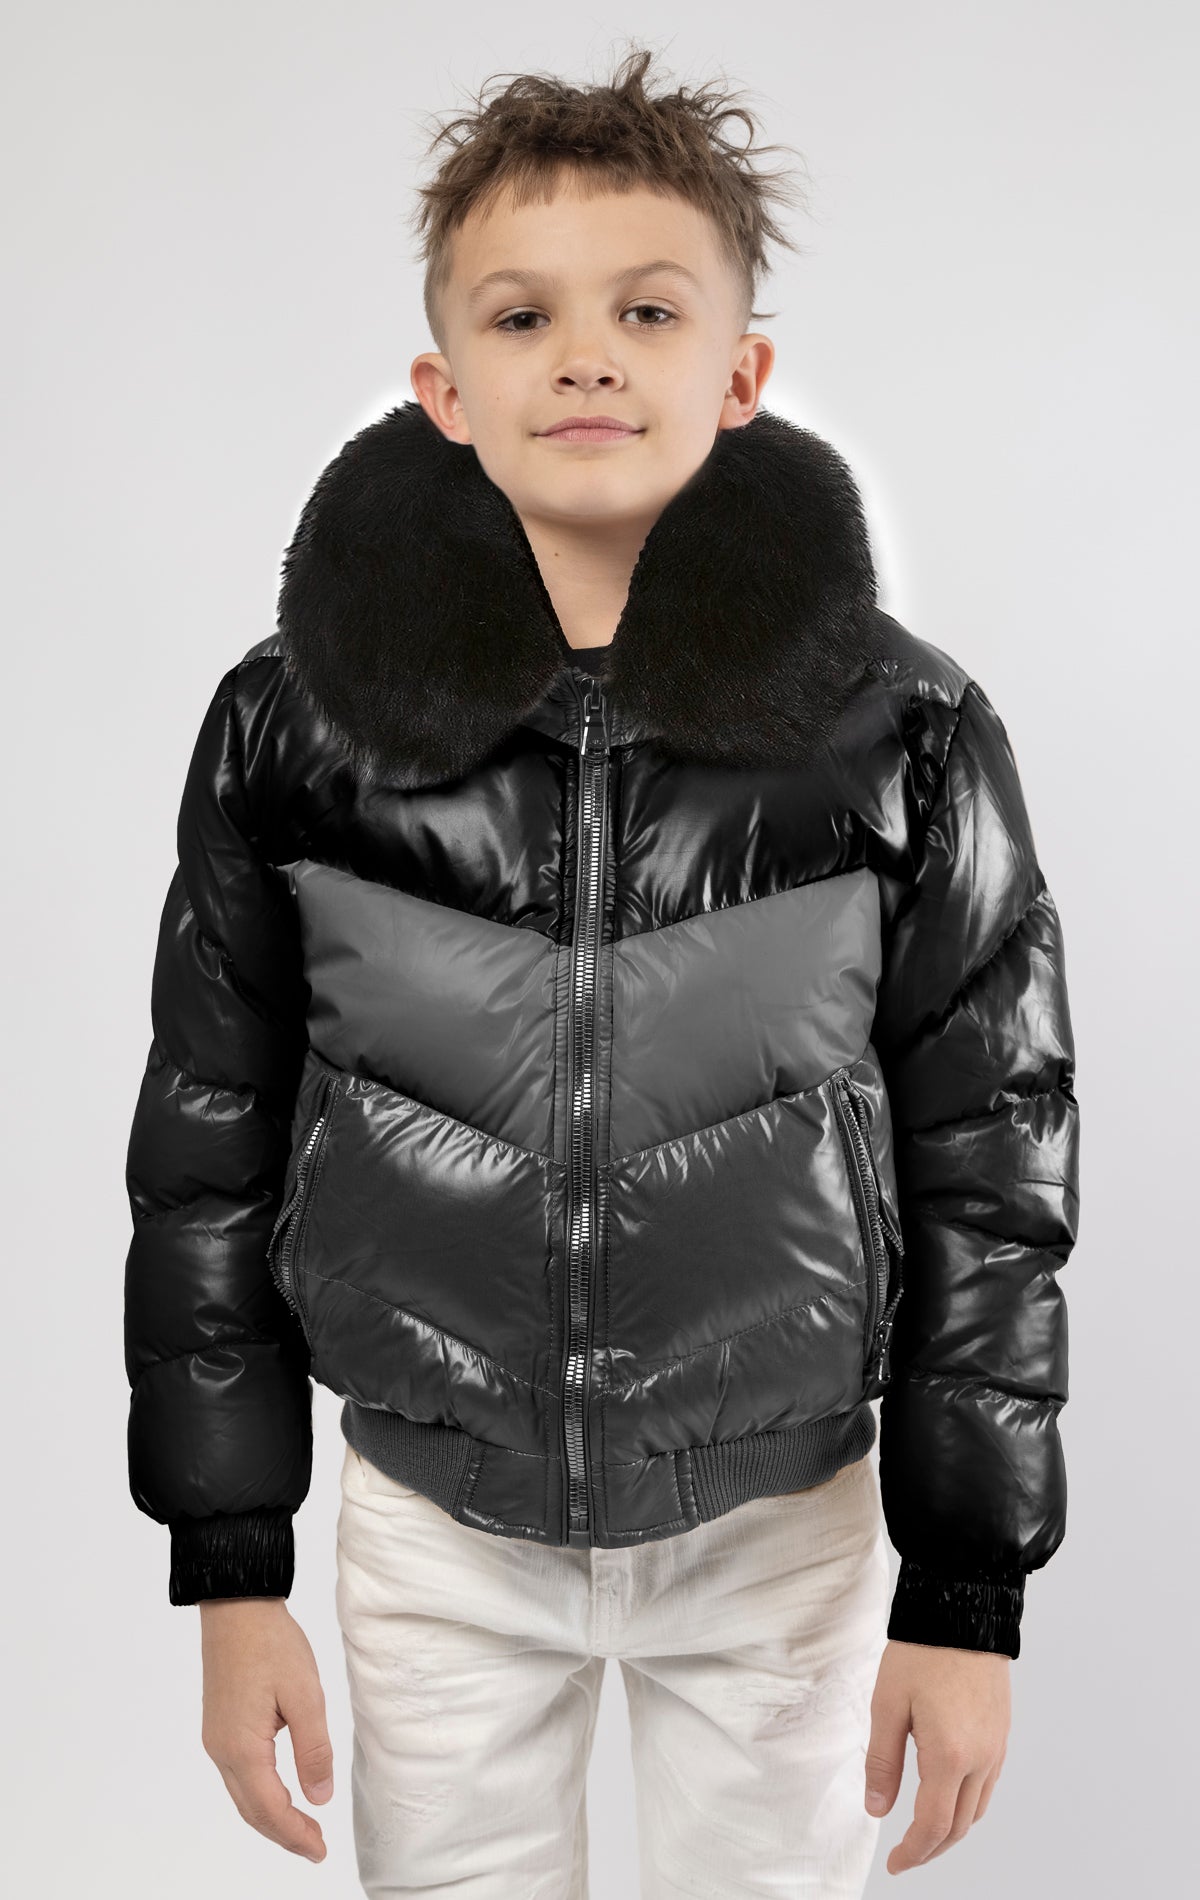 This kids' puffer jacket features a 100% nylon laqué shell, quilted padding, and 100% polyester lining. It also includes branded Jordan Craig zippers, dual side pockets with zipper closure, and a removable faux jackal fur collar.